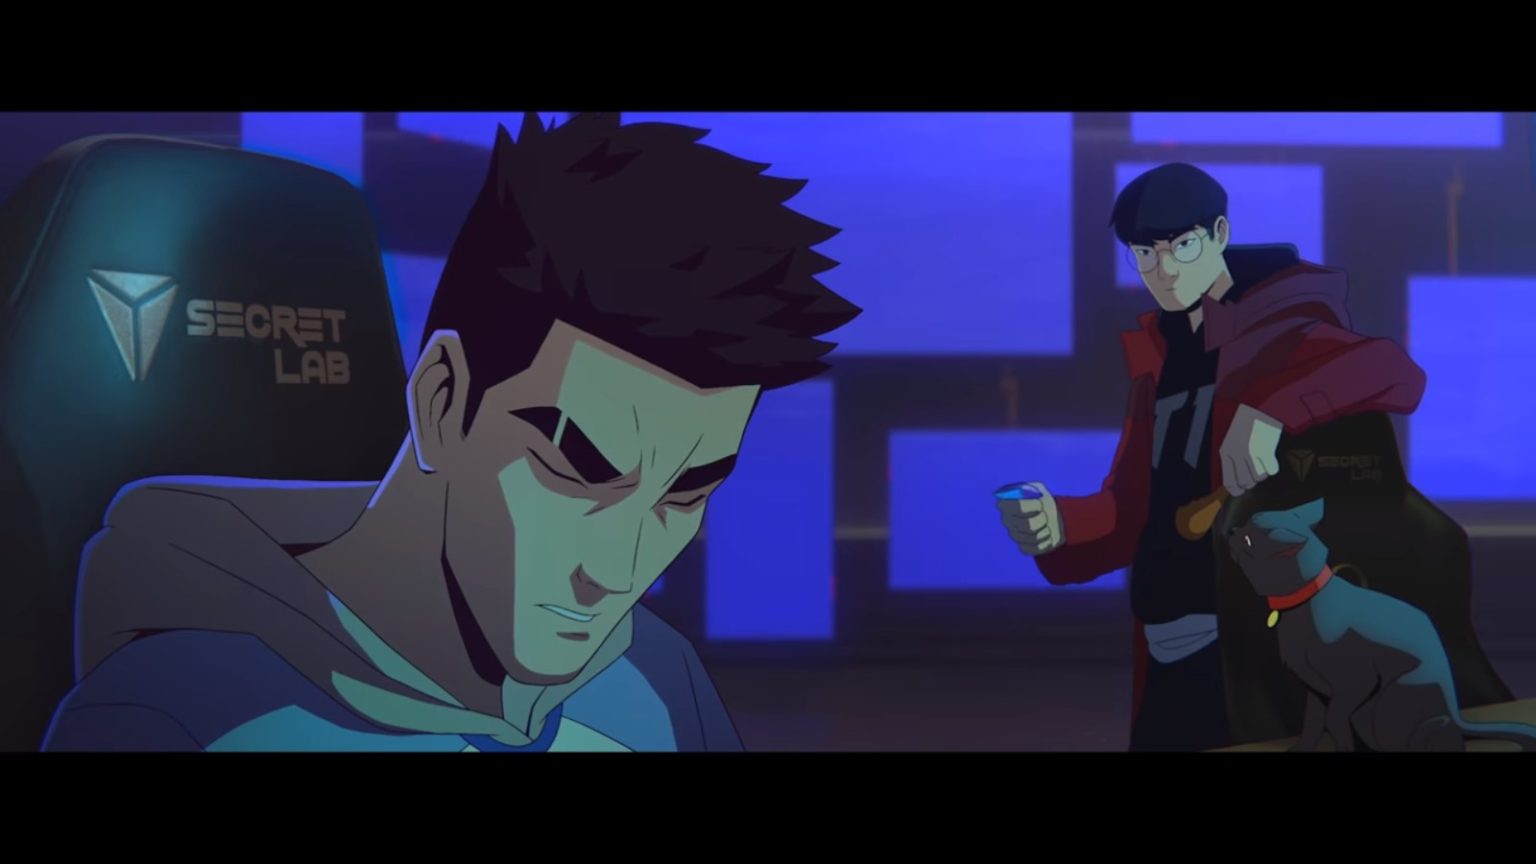 Faker trains the protagonist in the Take Over music video.